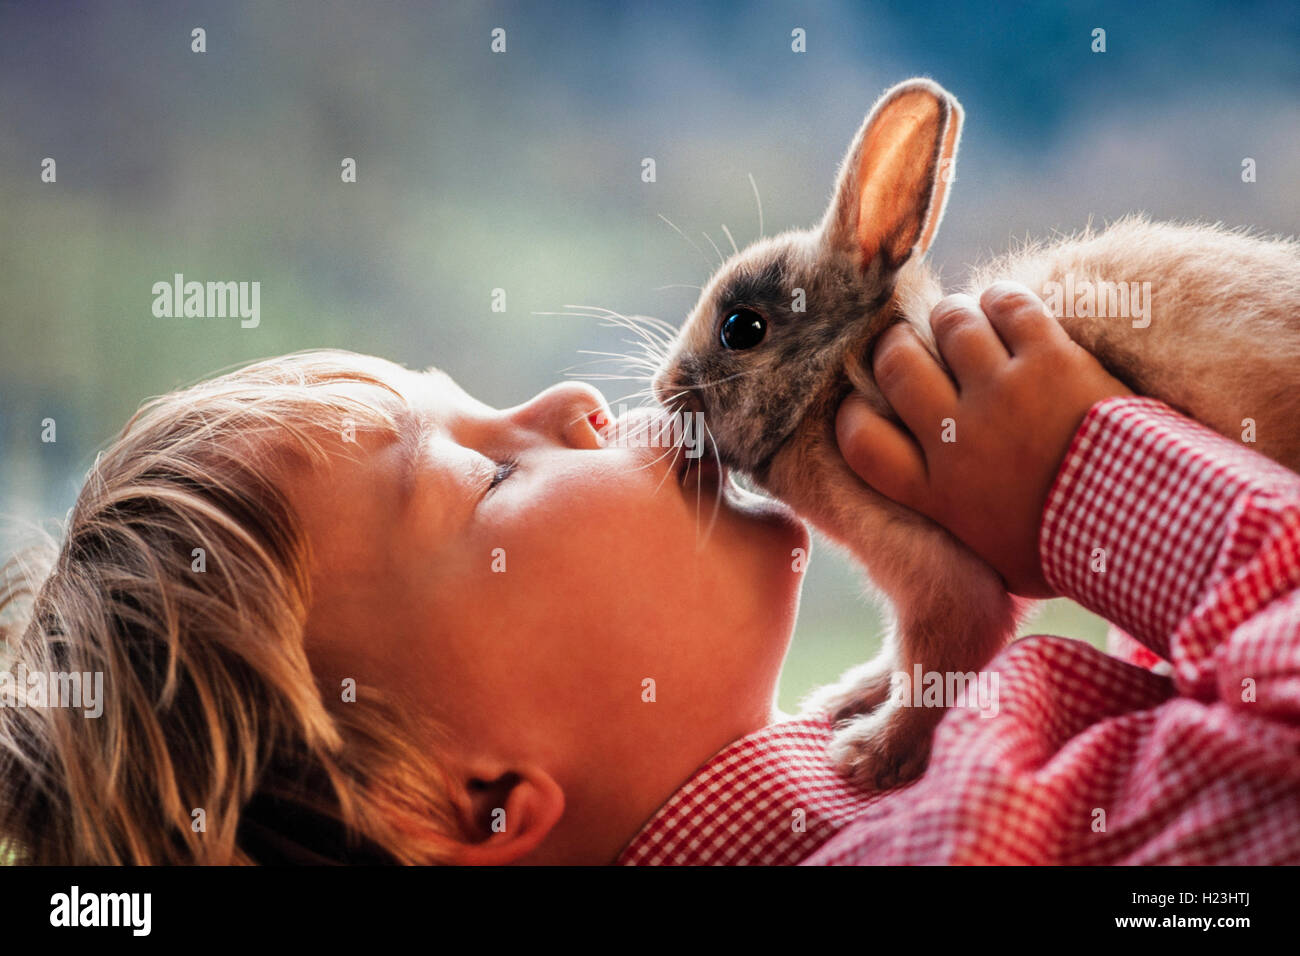 4-year-old girl kissing lapin, close-up, Autriche Banque D'Images